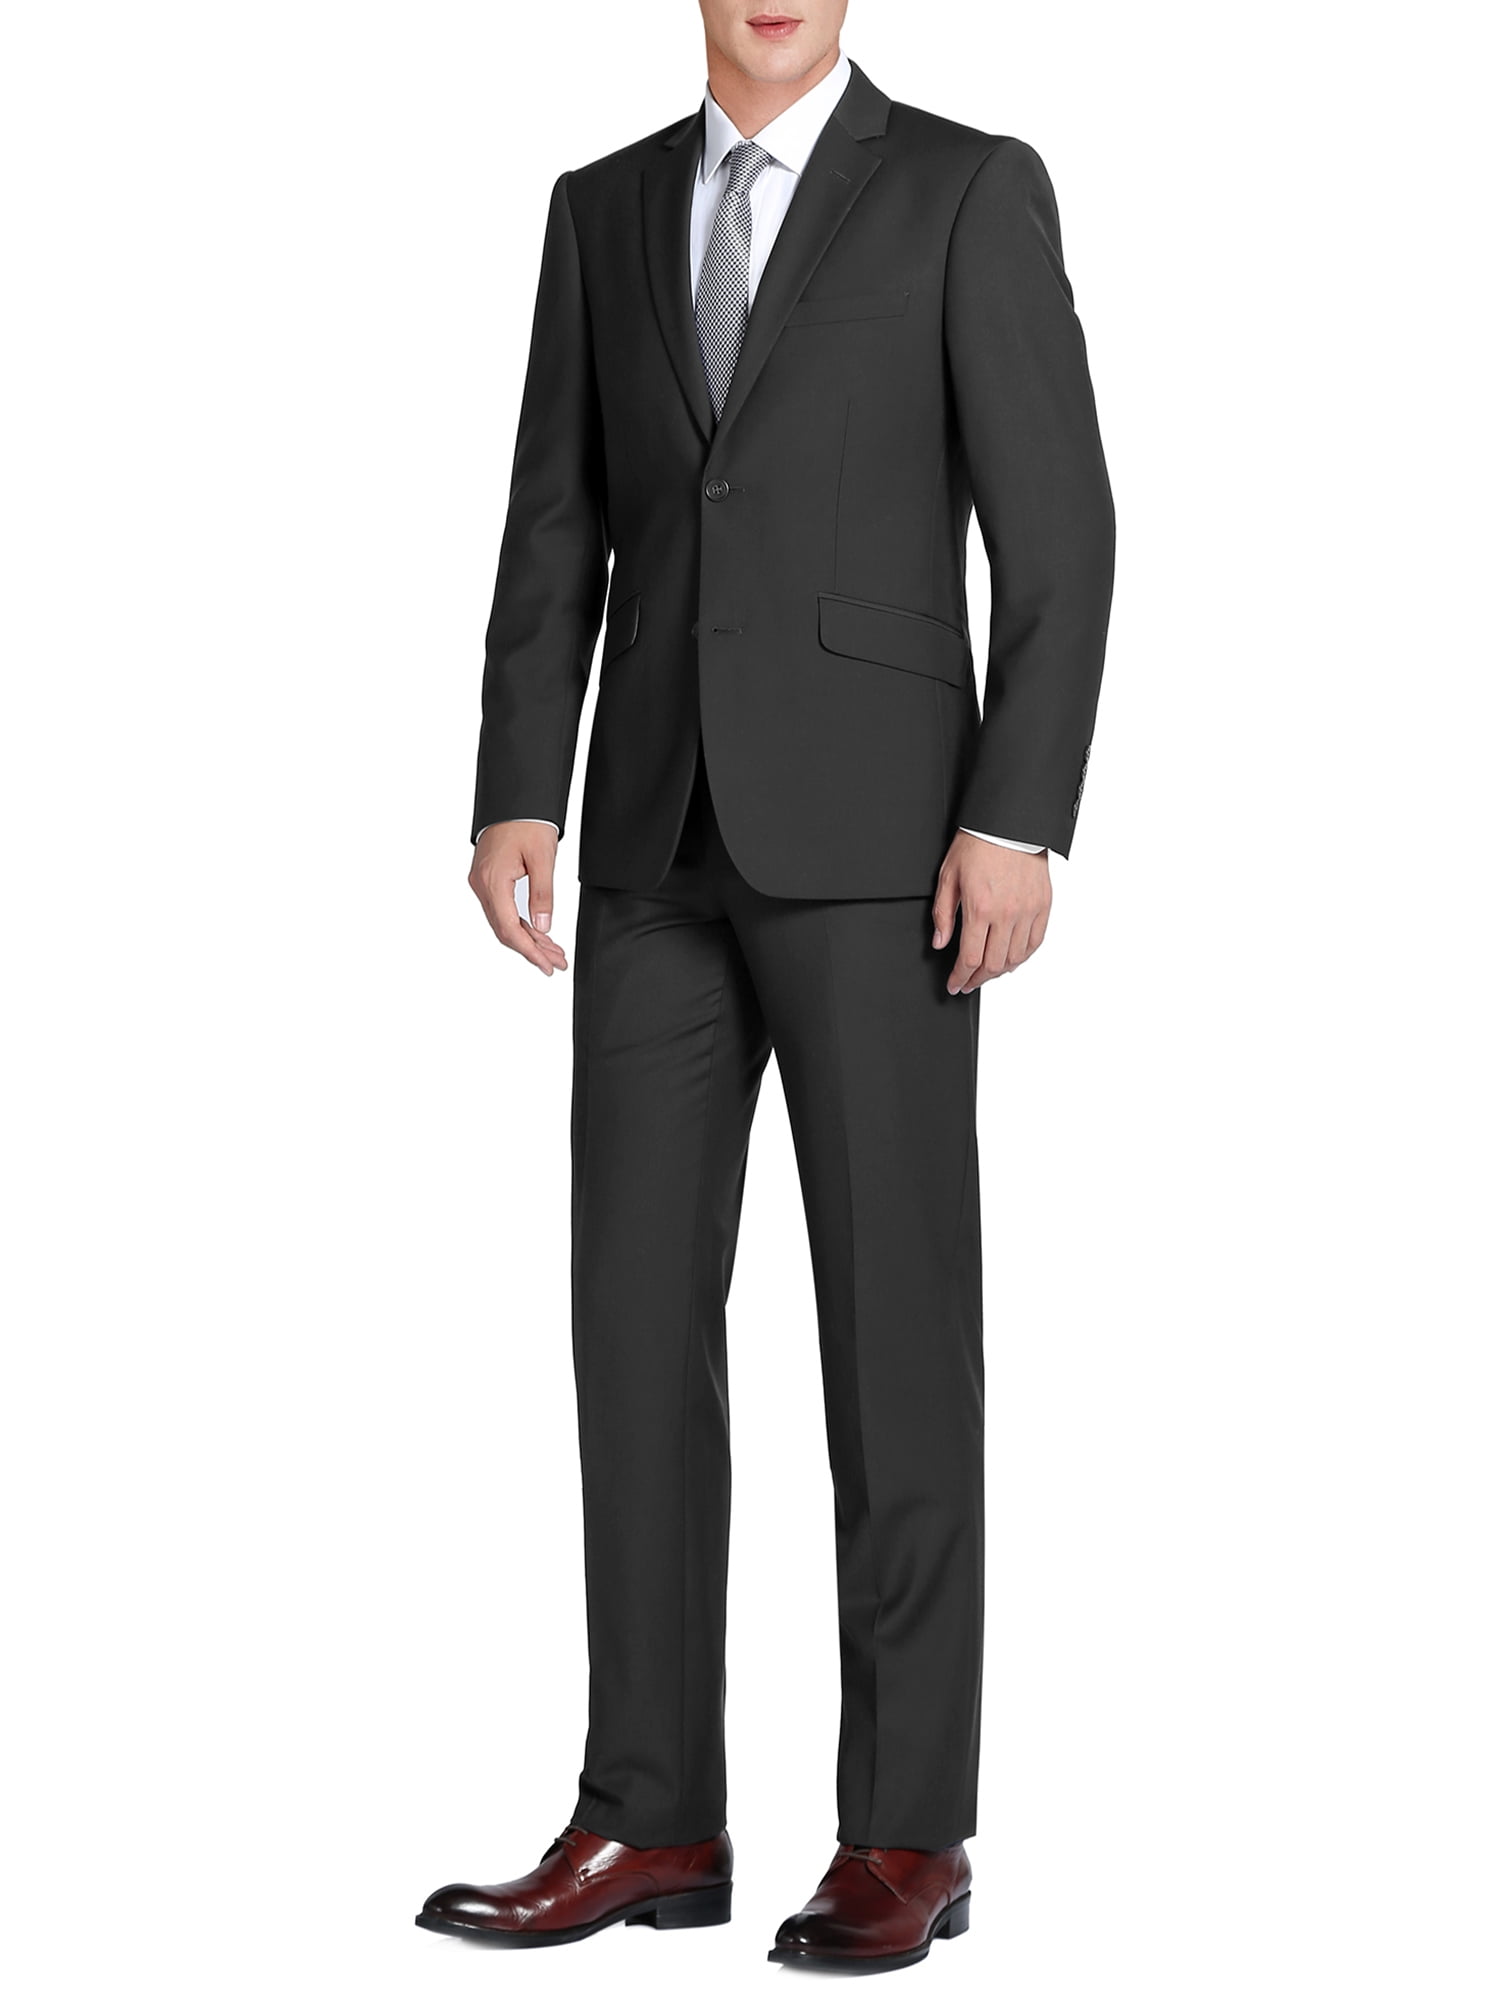 WEEN CHARM Mens Slim Fit 2-Piece Suit One Button Blazer Wedding Tuxedo Single Breasted Jacket Pants Set